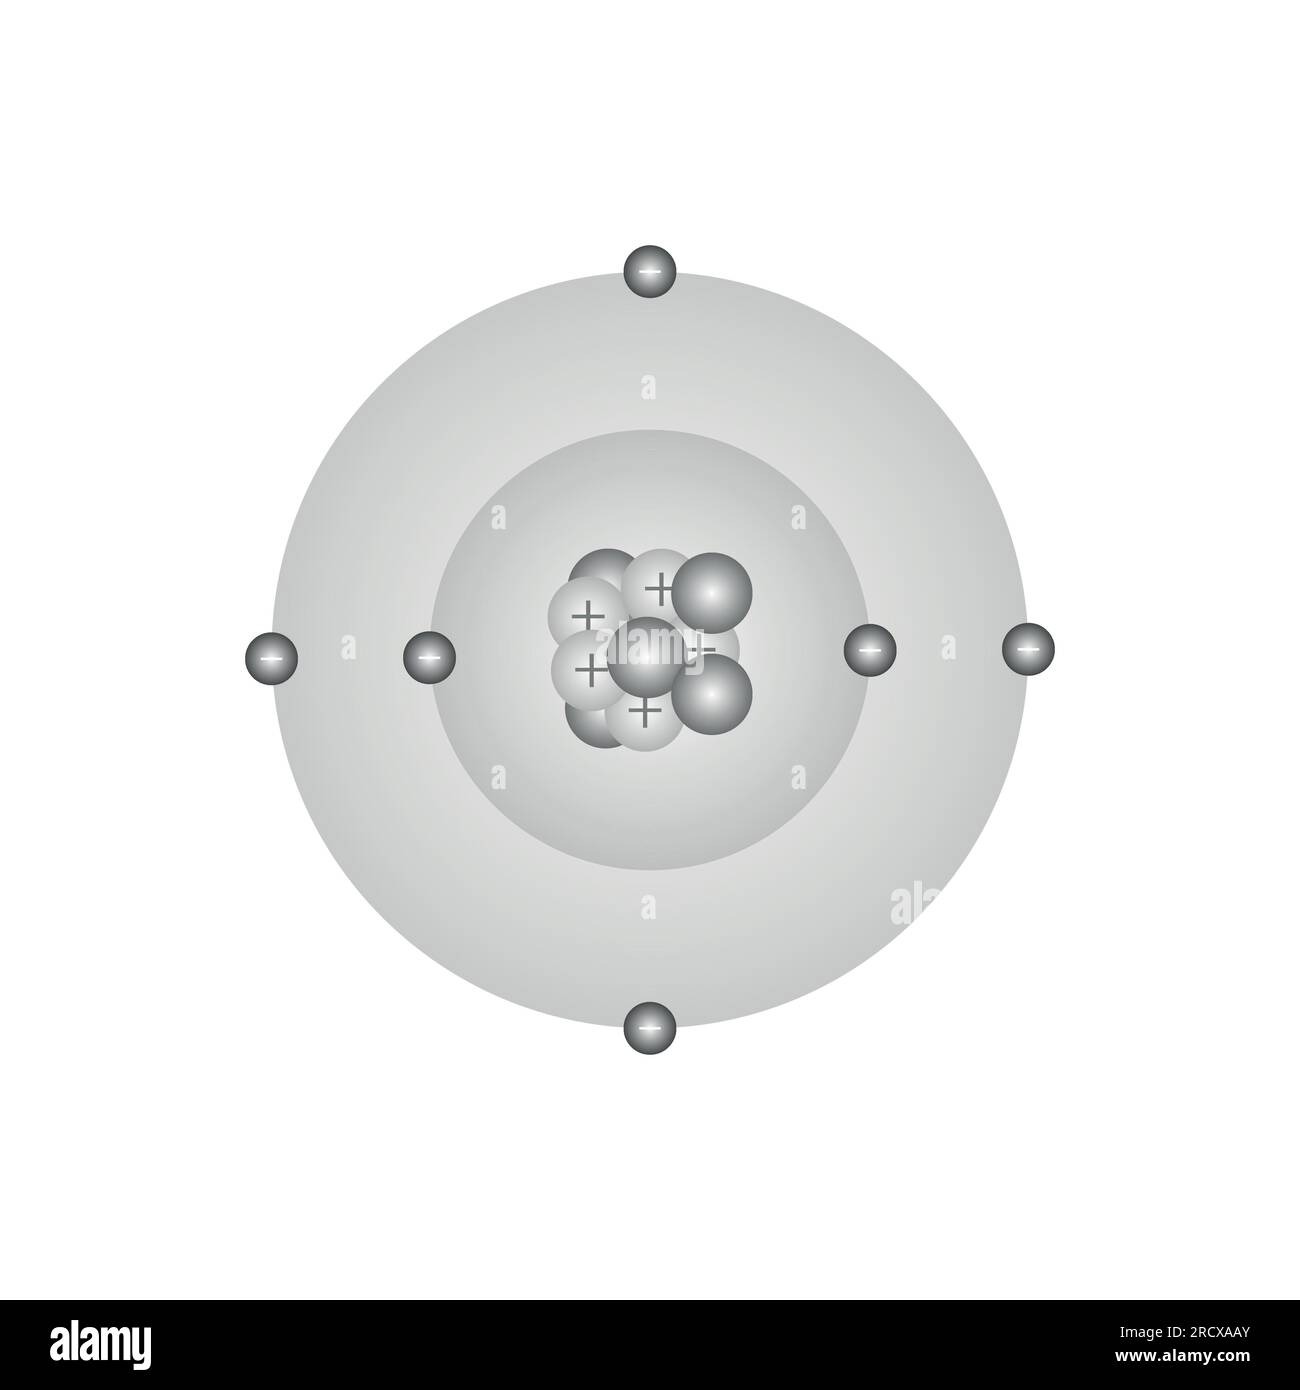 Bohr atomic model of atom. Proton, neutron, electron and electron orbits. Atomic structure model. Vector illustration isolated on white background. Stock Vector